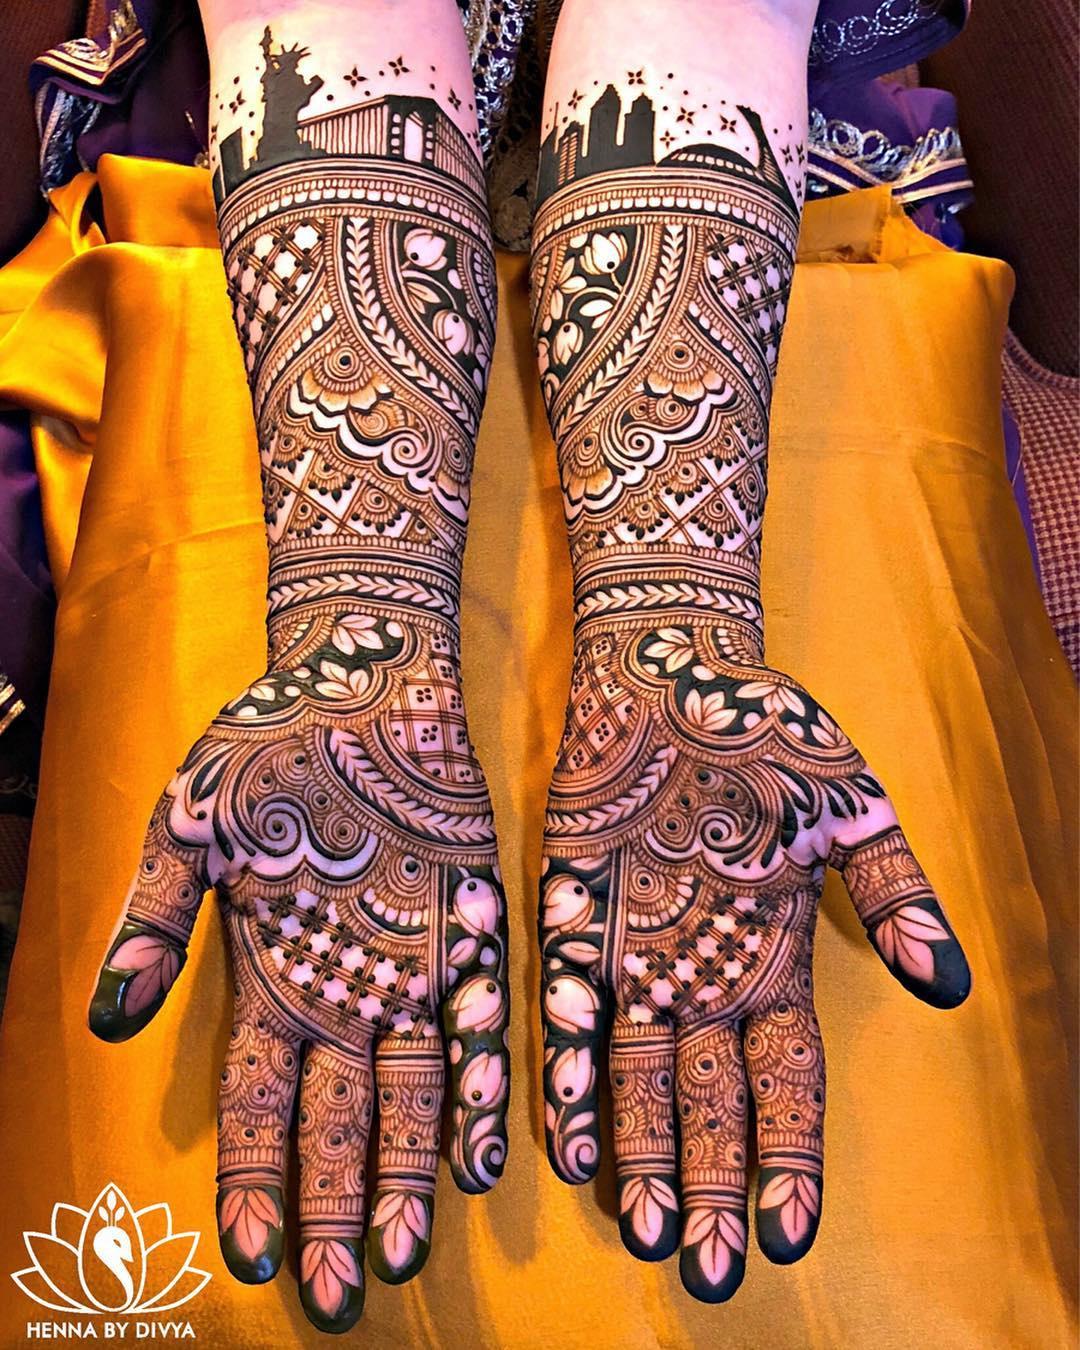 History of Mehndi - History of Henna | Greenwich, CT Patch